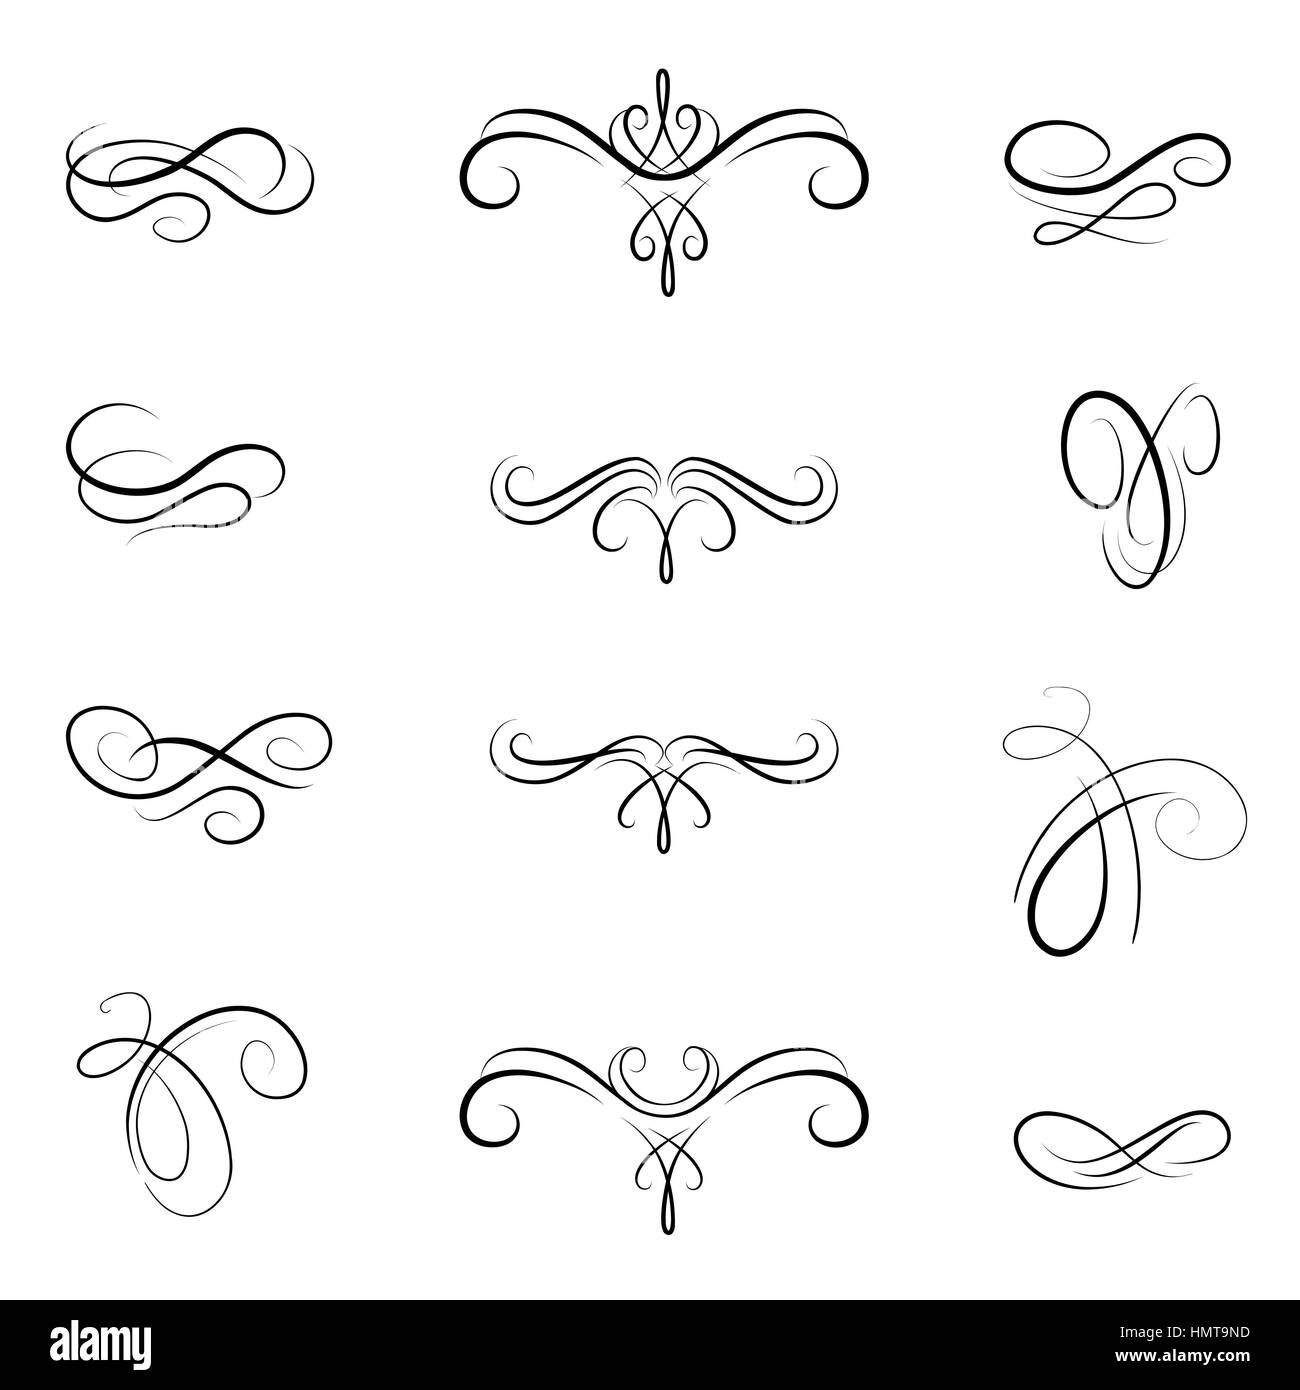 Calligraphic flourish design elements. Page decoration doodle vignette set in retro style. Elegant vintage borders and dividers for greeting card, ret Stock Vector